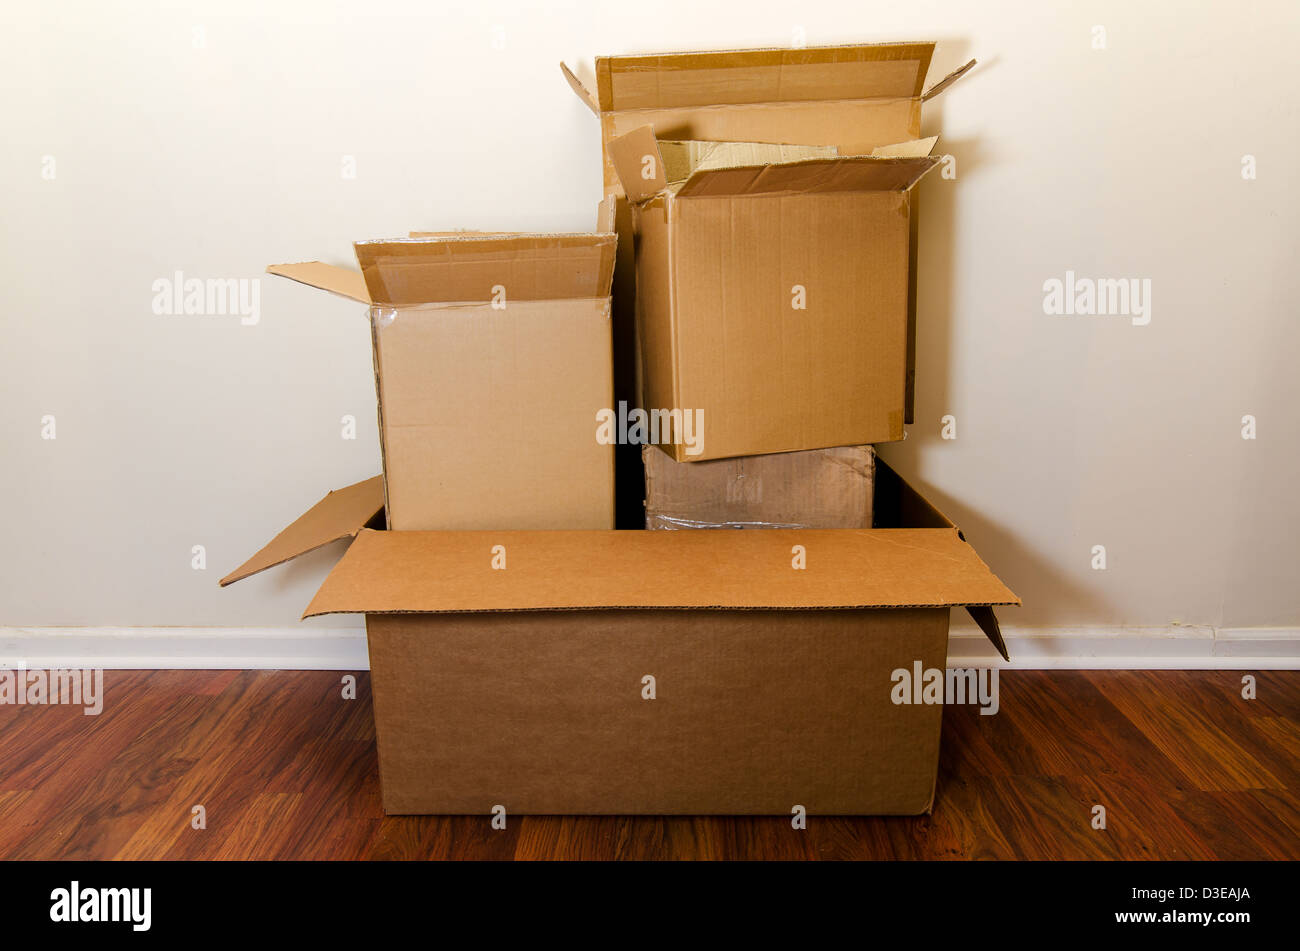 Moving day with empty cardboard boxes on hardwood floor. Stock Photo